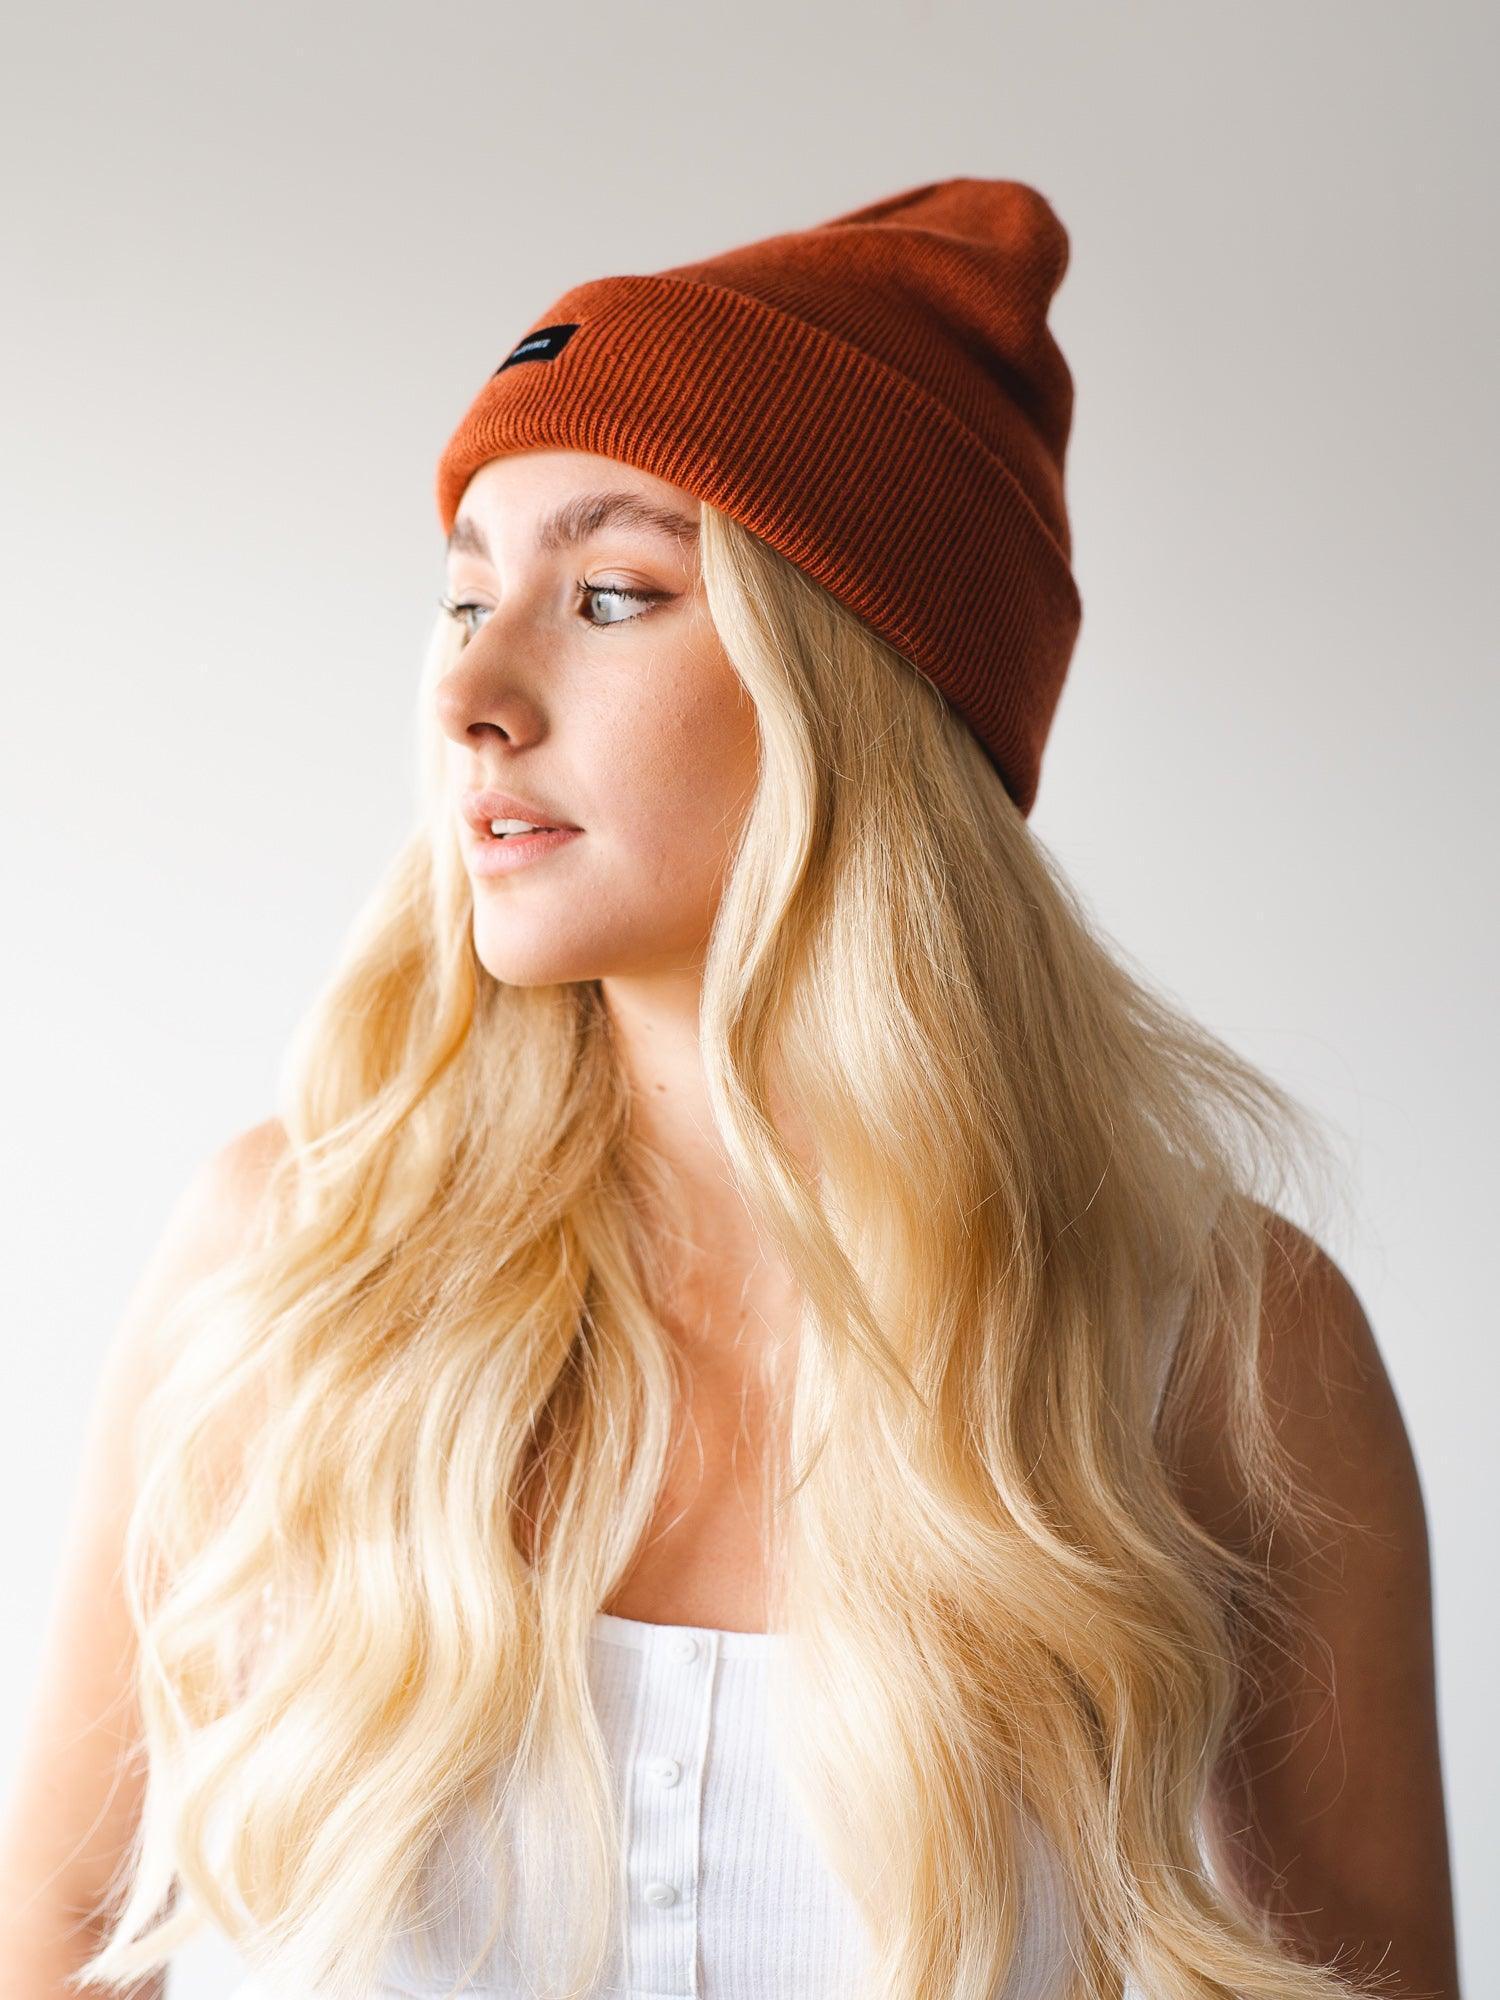 Stay warm and fashionable all winter long with our Rust Beanie, featuring a cozy and eye-catching rust color to elevate your cold-weather style